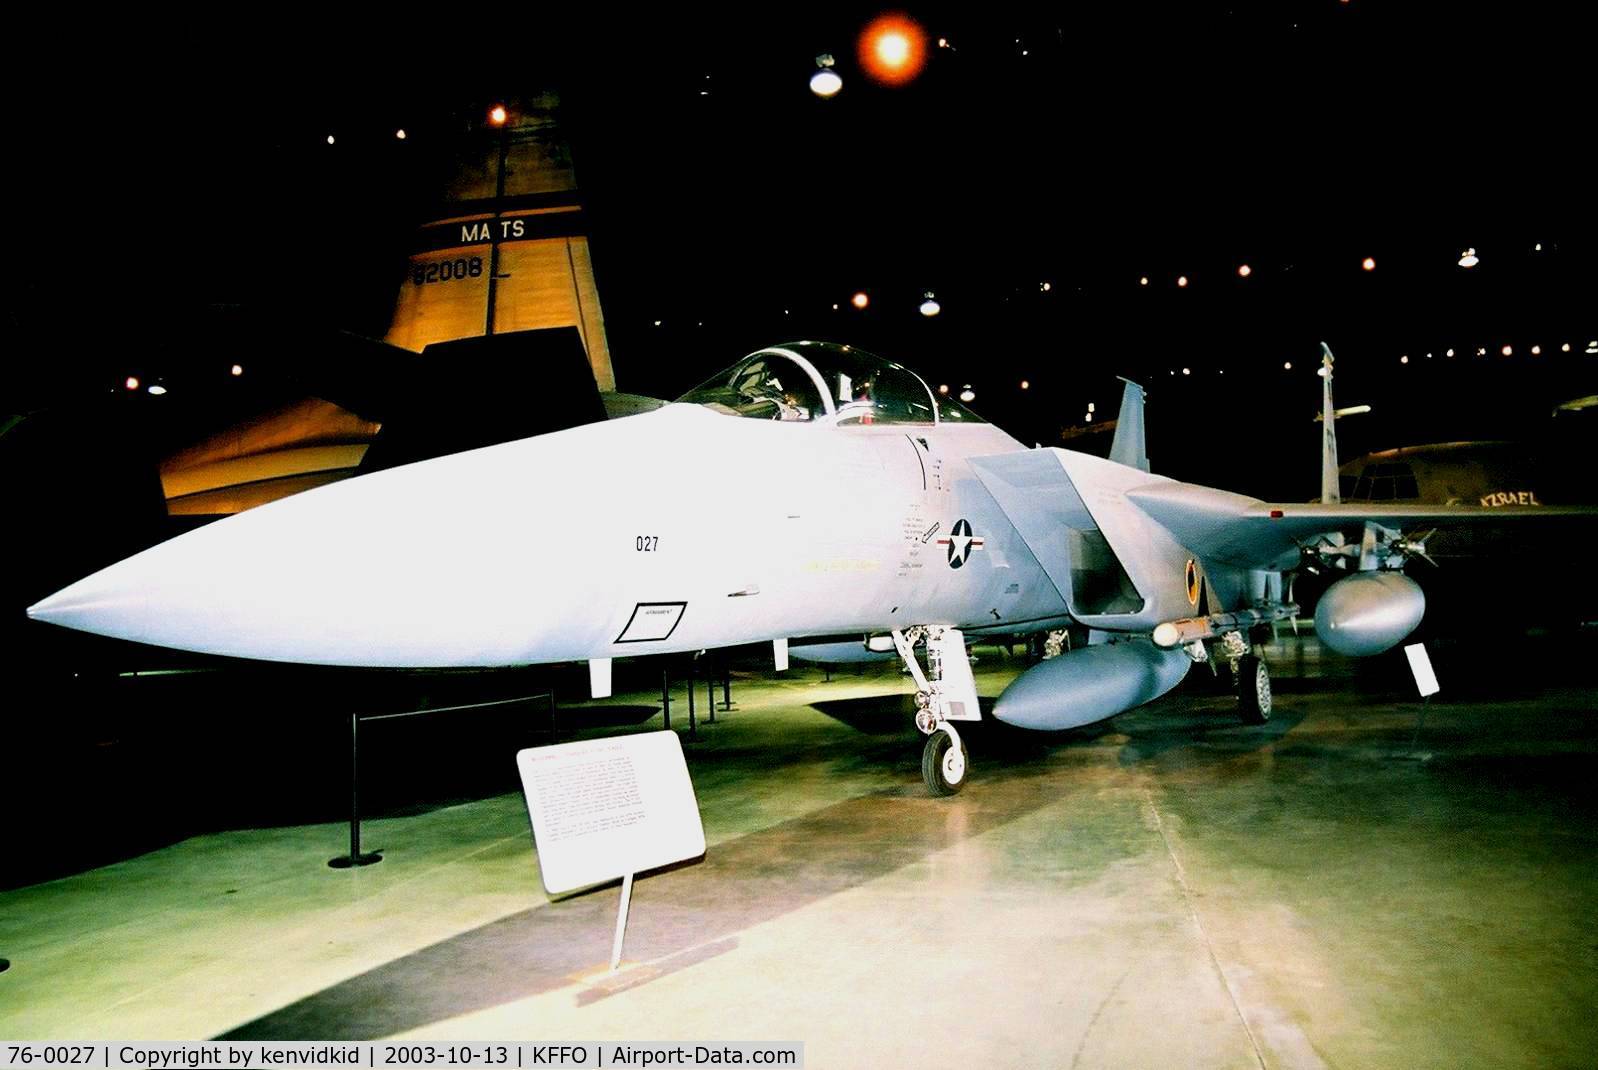 76-0027, 1976 McDonnell Douglas F-15A Eagle C/N 0207/A179, At The Museum of the United States Air Force Dayton Ohio.